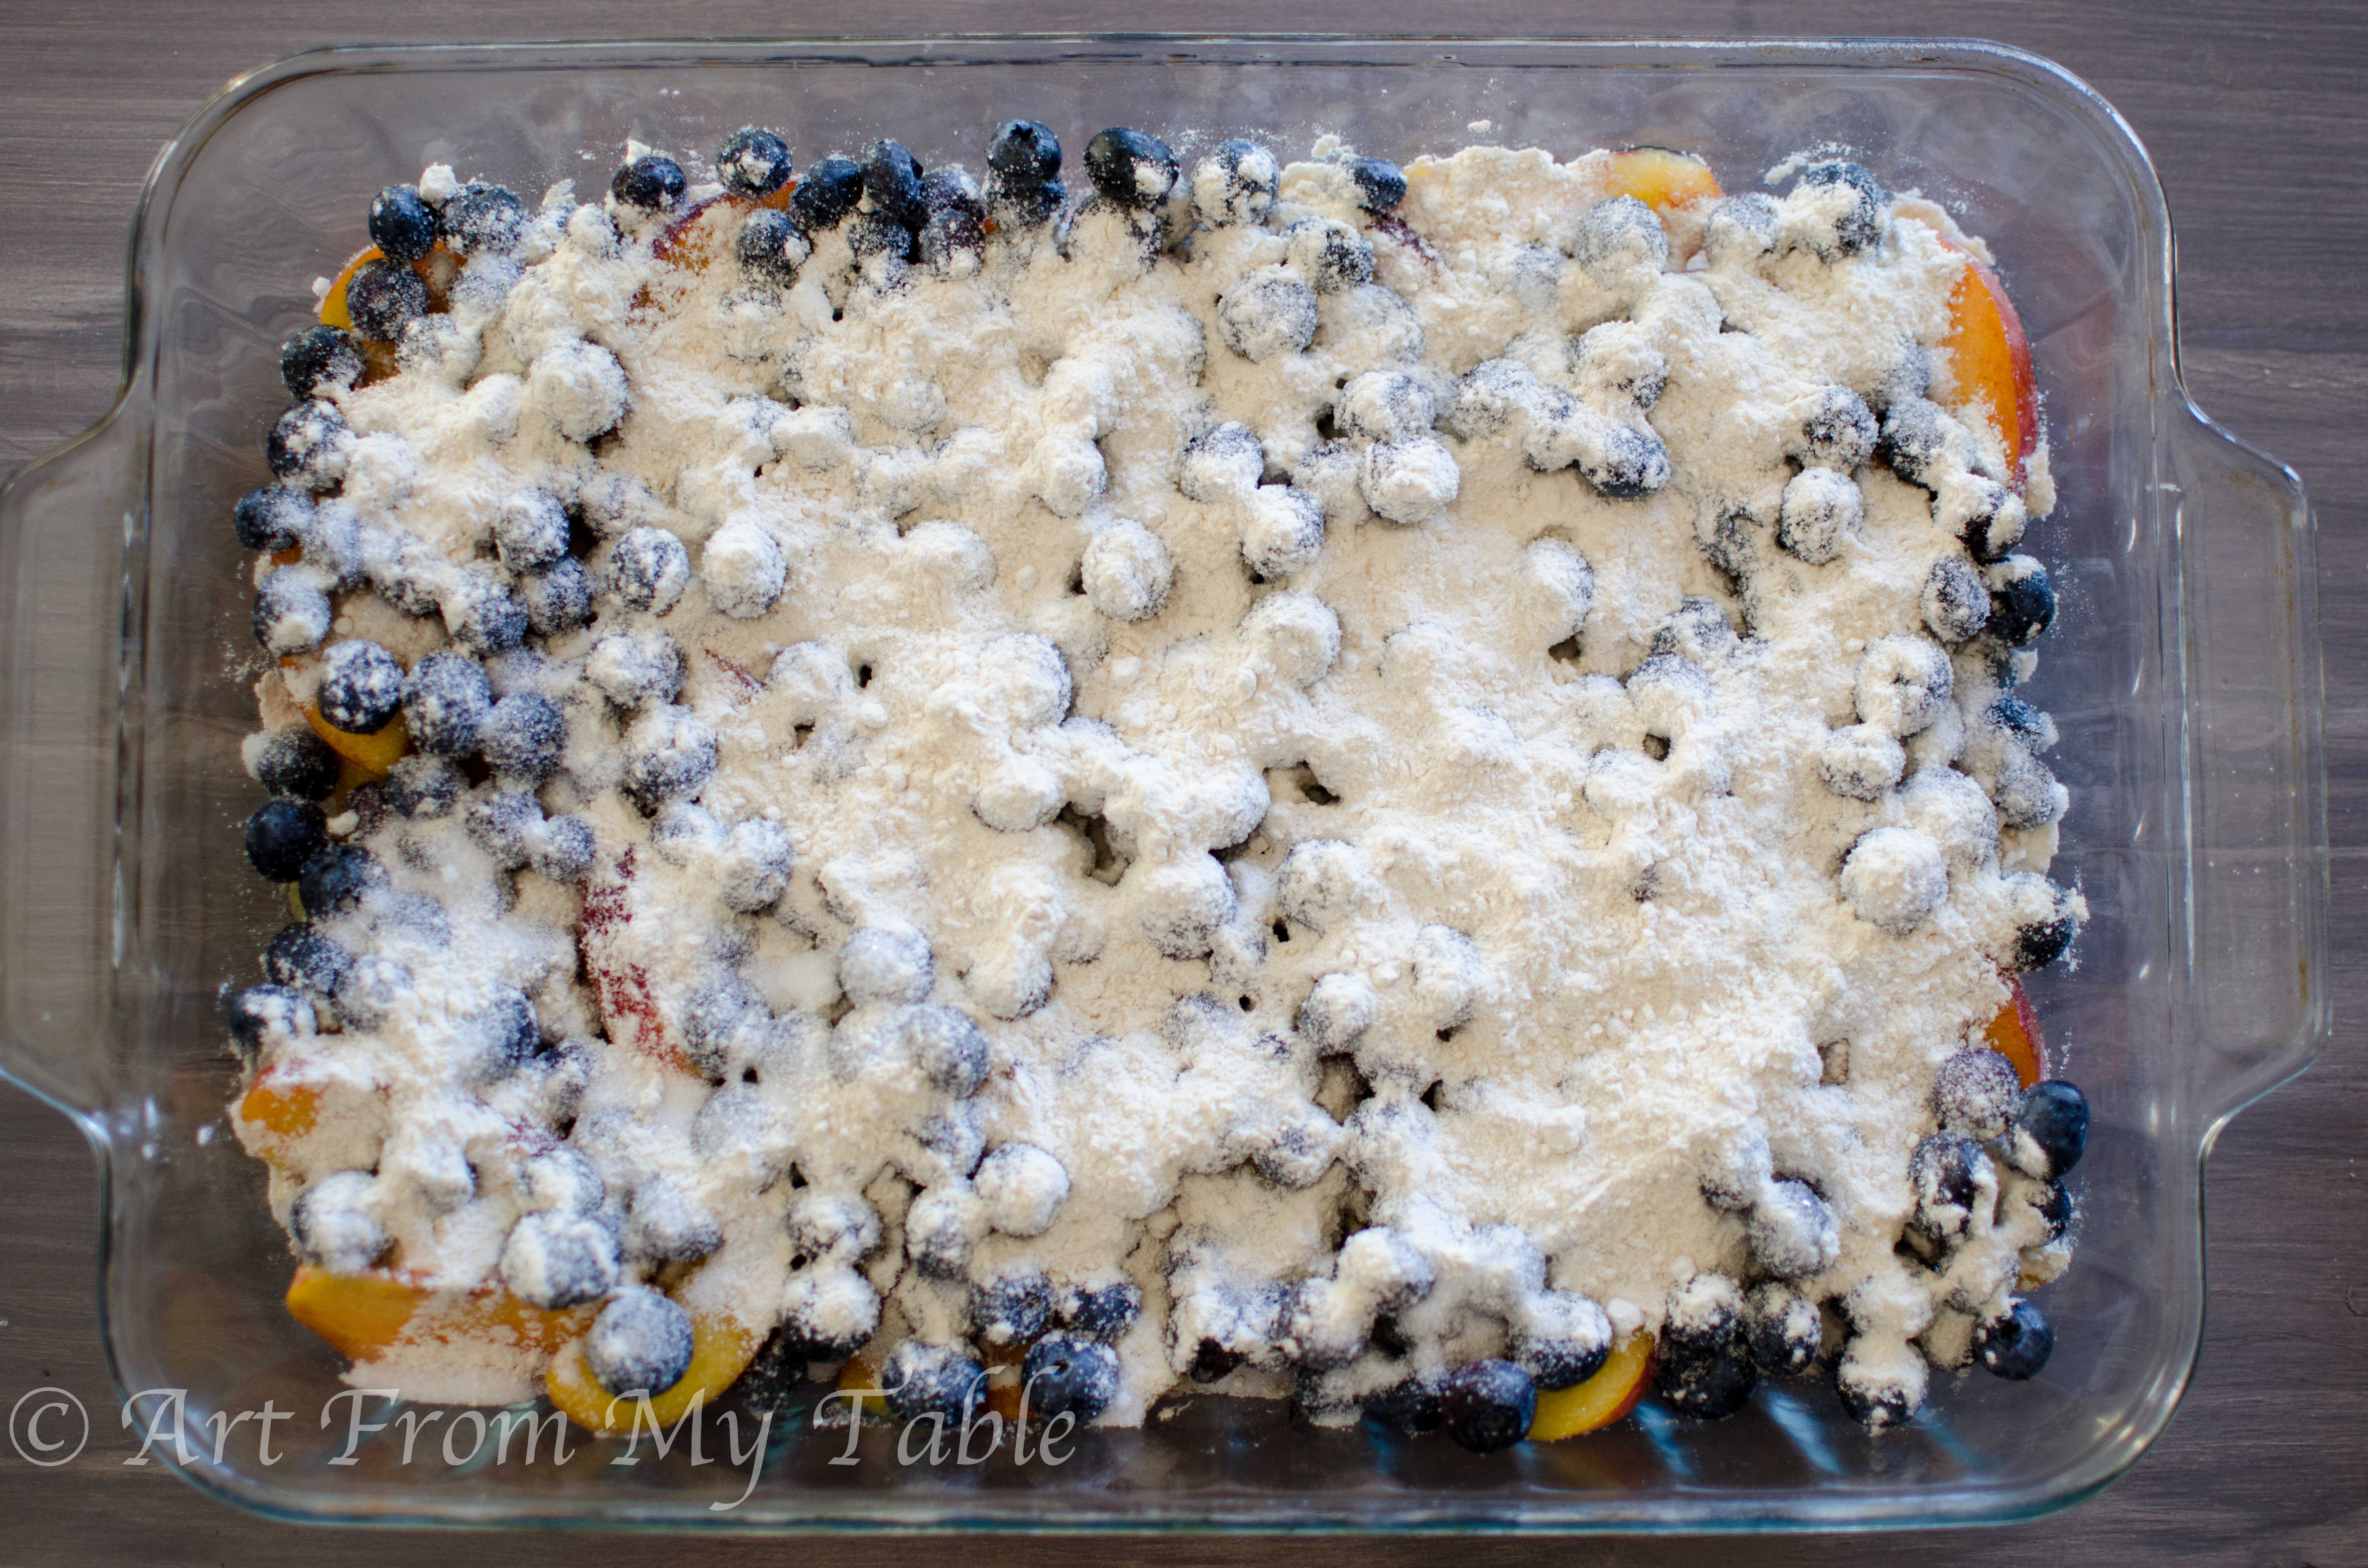 Fresh peaches and blueberries with sugar and flour sprinkled over top.